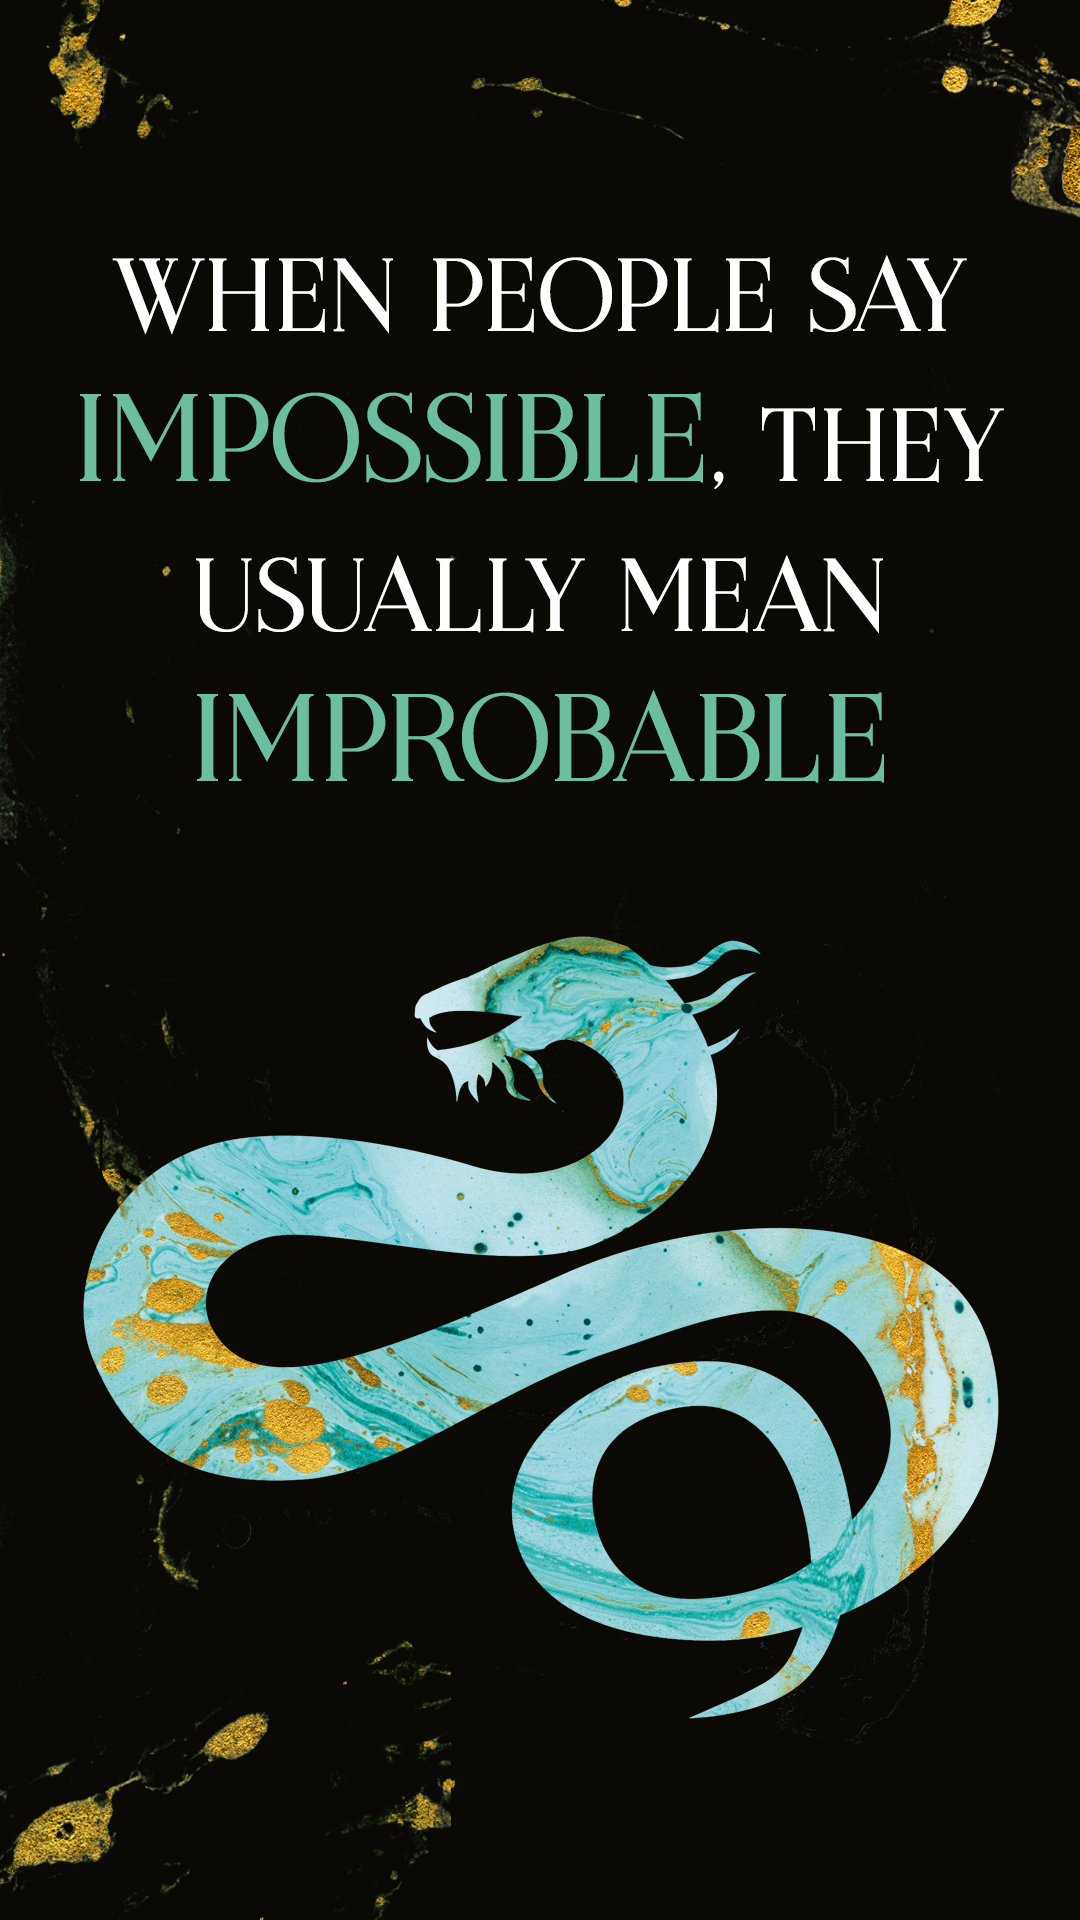 An artistic book cover with a stylized blue and white serpent on a black background with gold splatter. text reads "when people say impossible, they usually mean improbable.